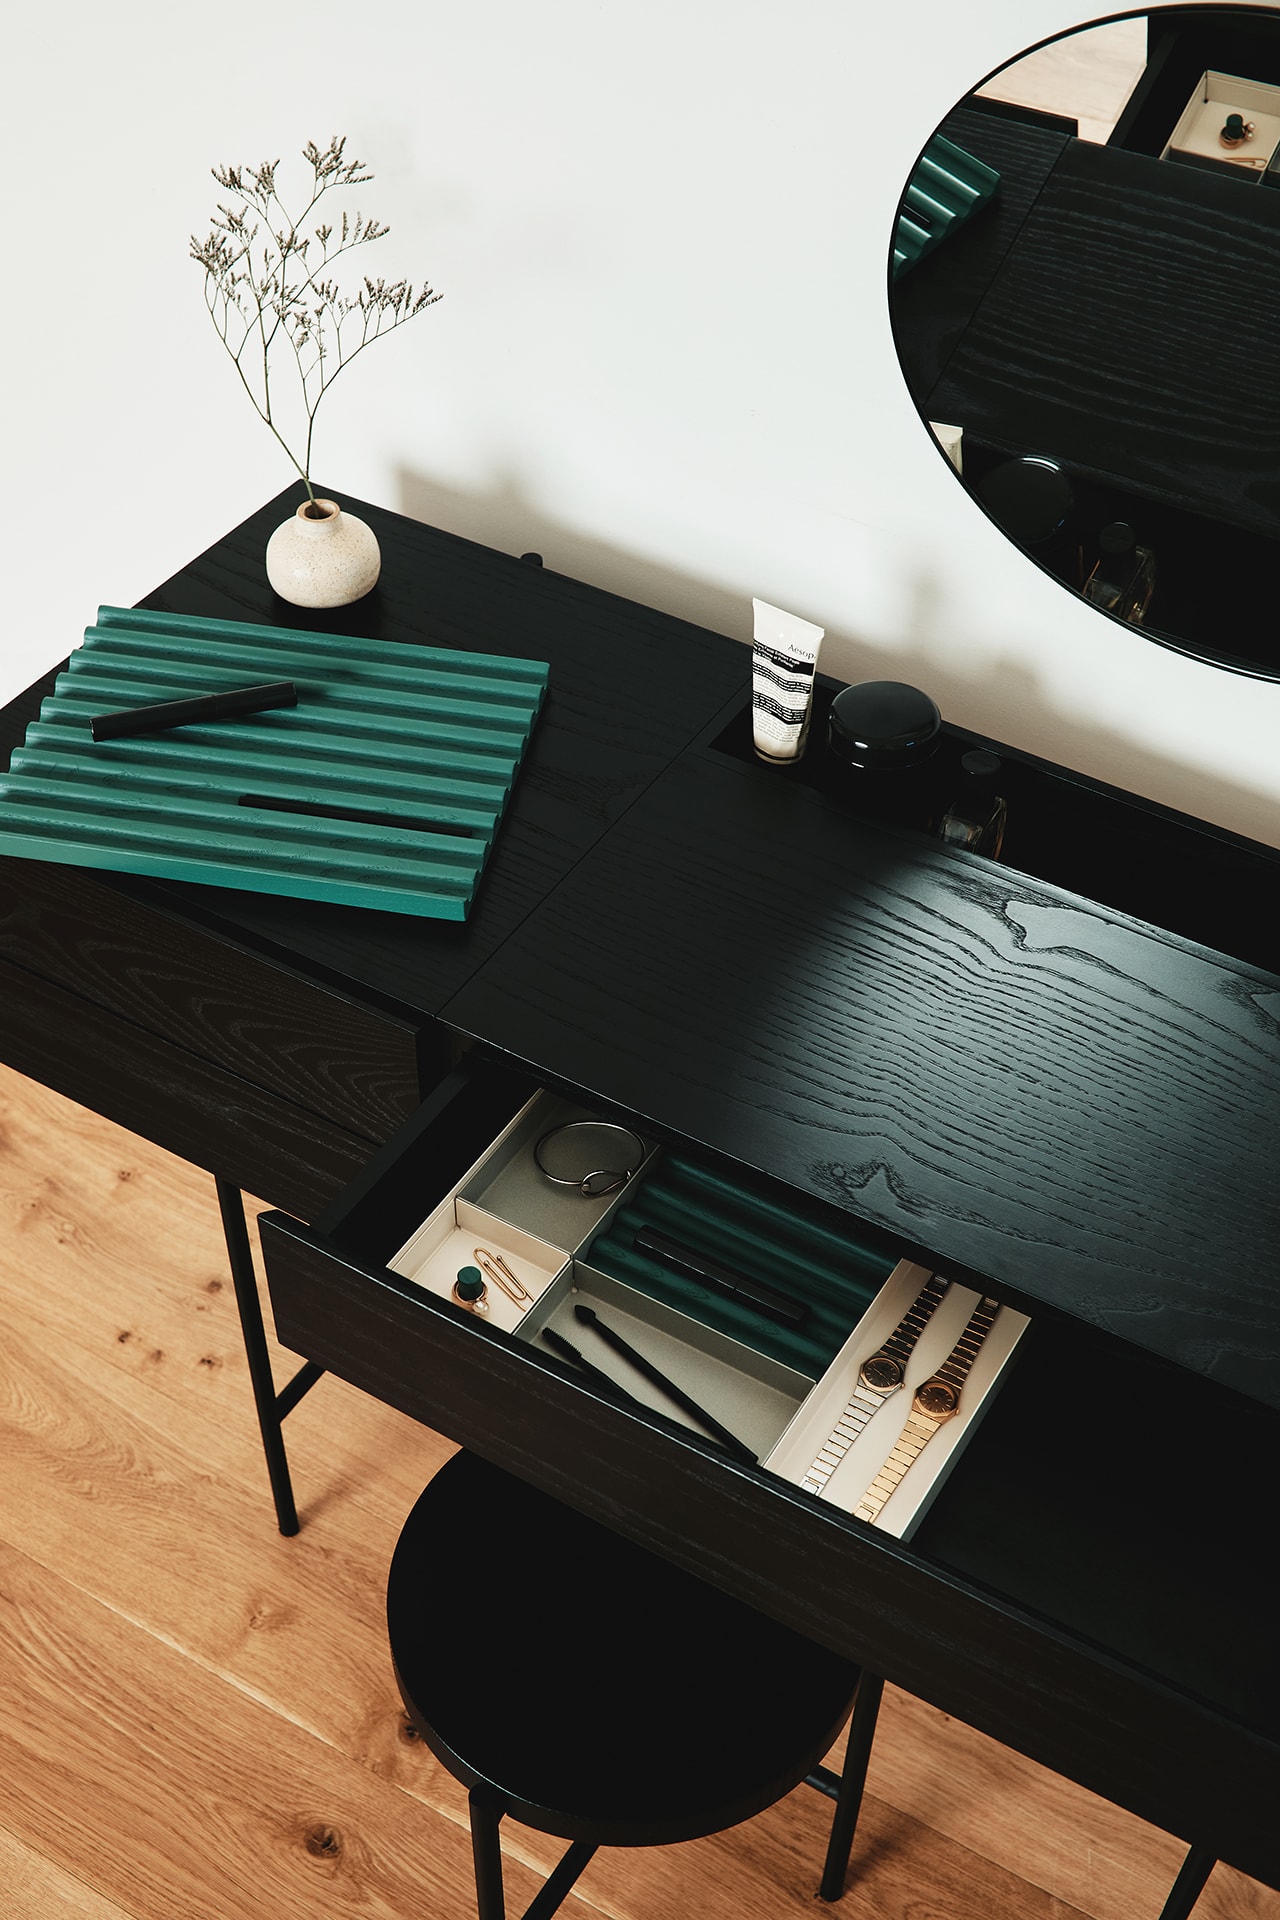 Dims Composed Vanity Table Stool Tray Ink Black Wood Mirror Makeup Desk Home Furniture Organization Jewelry Green